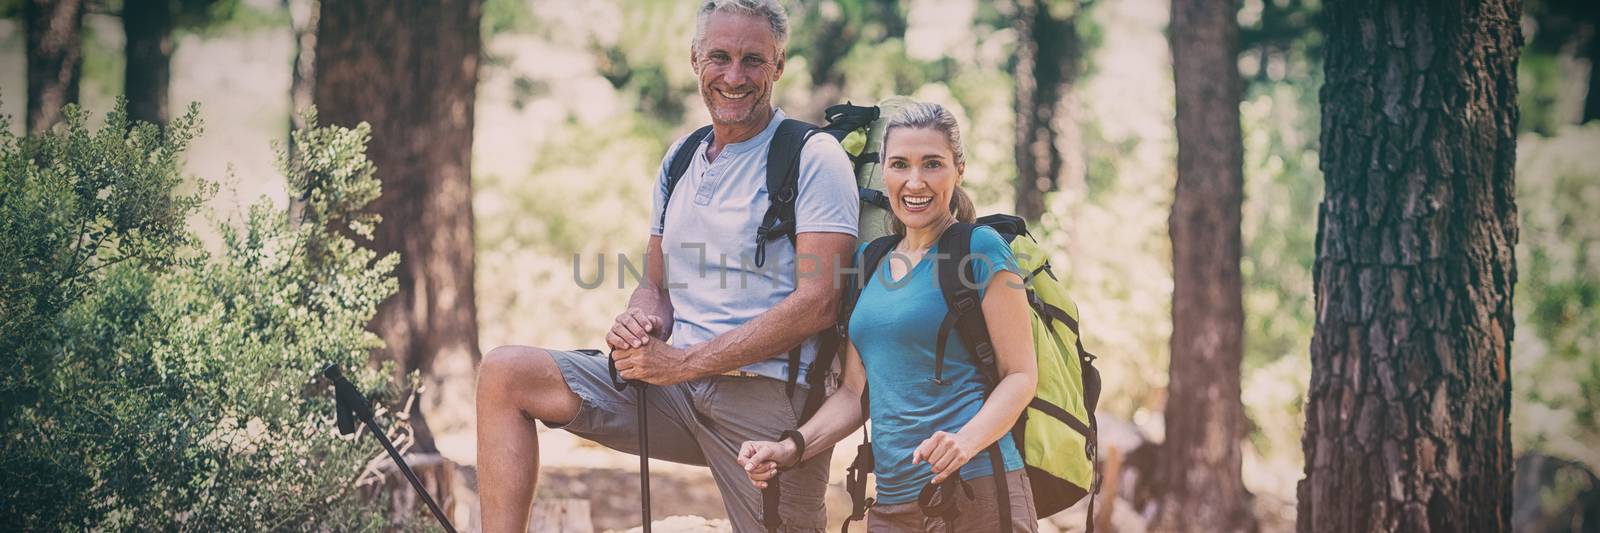 Couple smiling and posing during a hike  by Wavebreakmedia